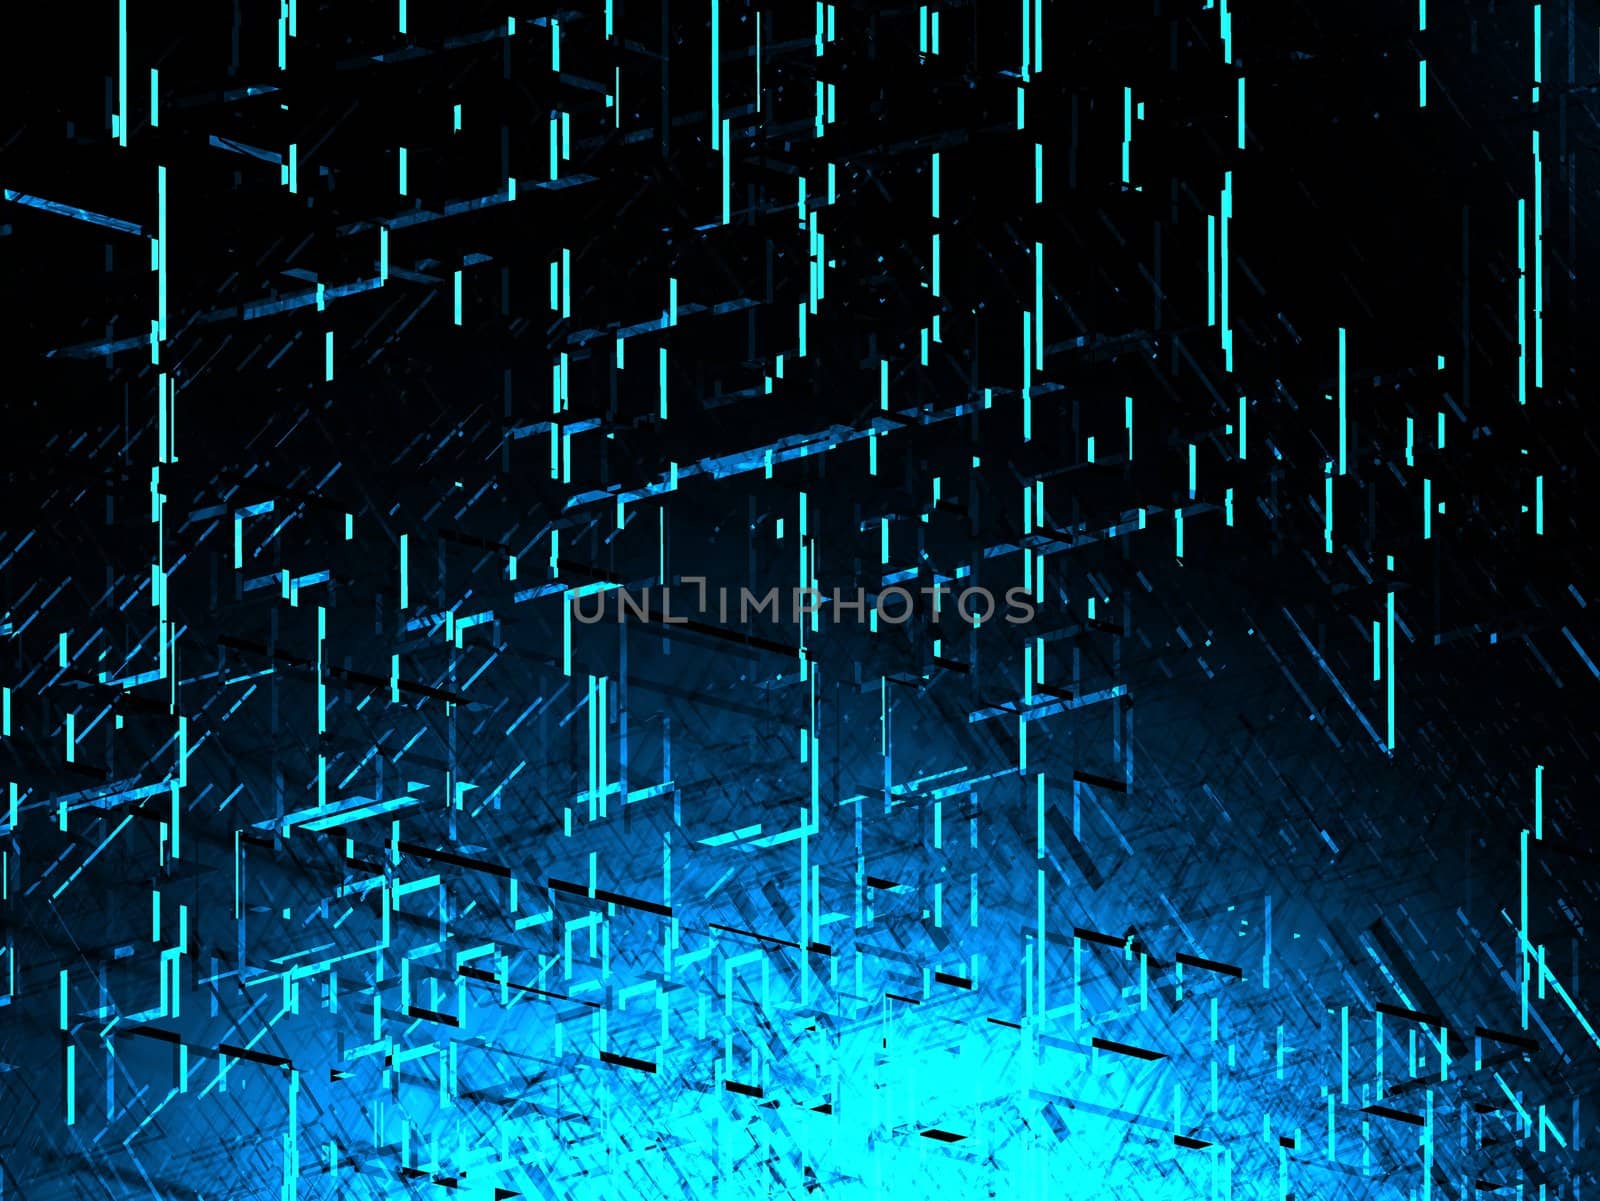 Abstract blue image with hard edges on black.